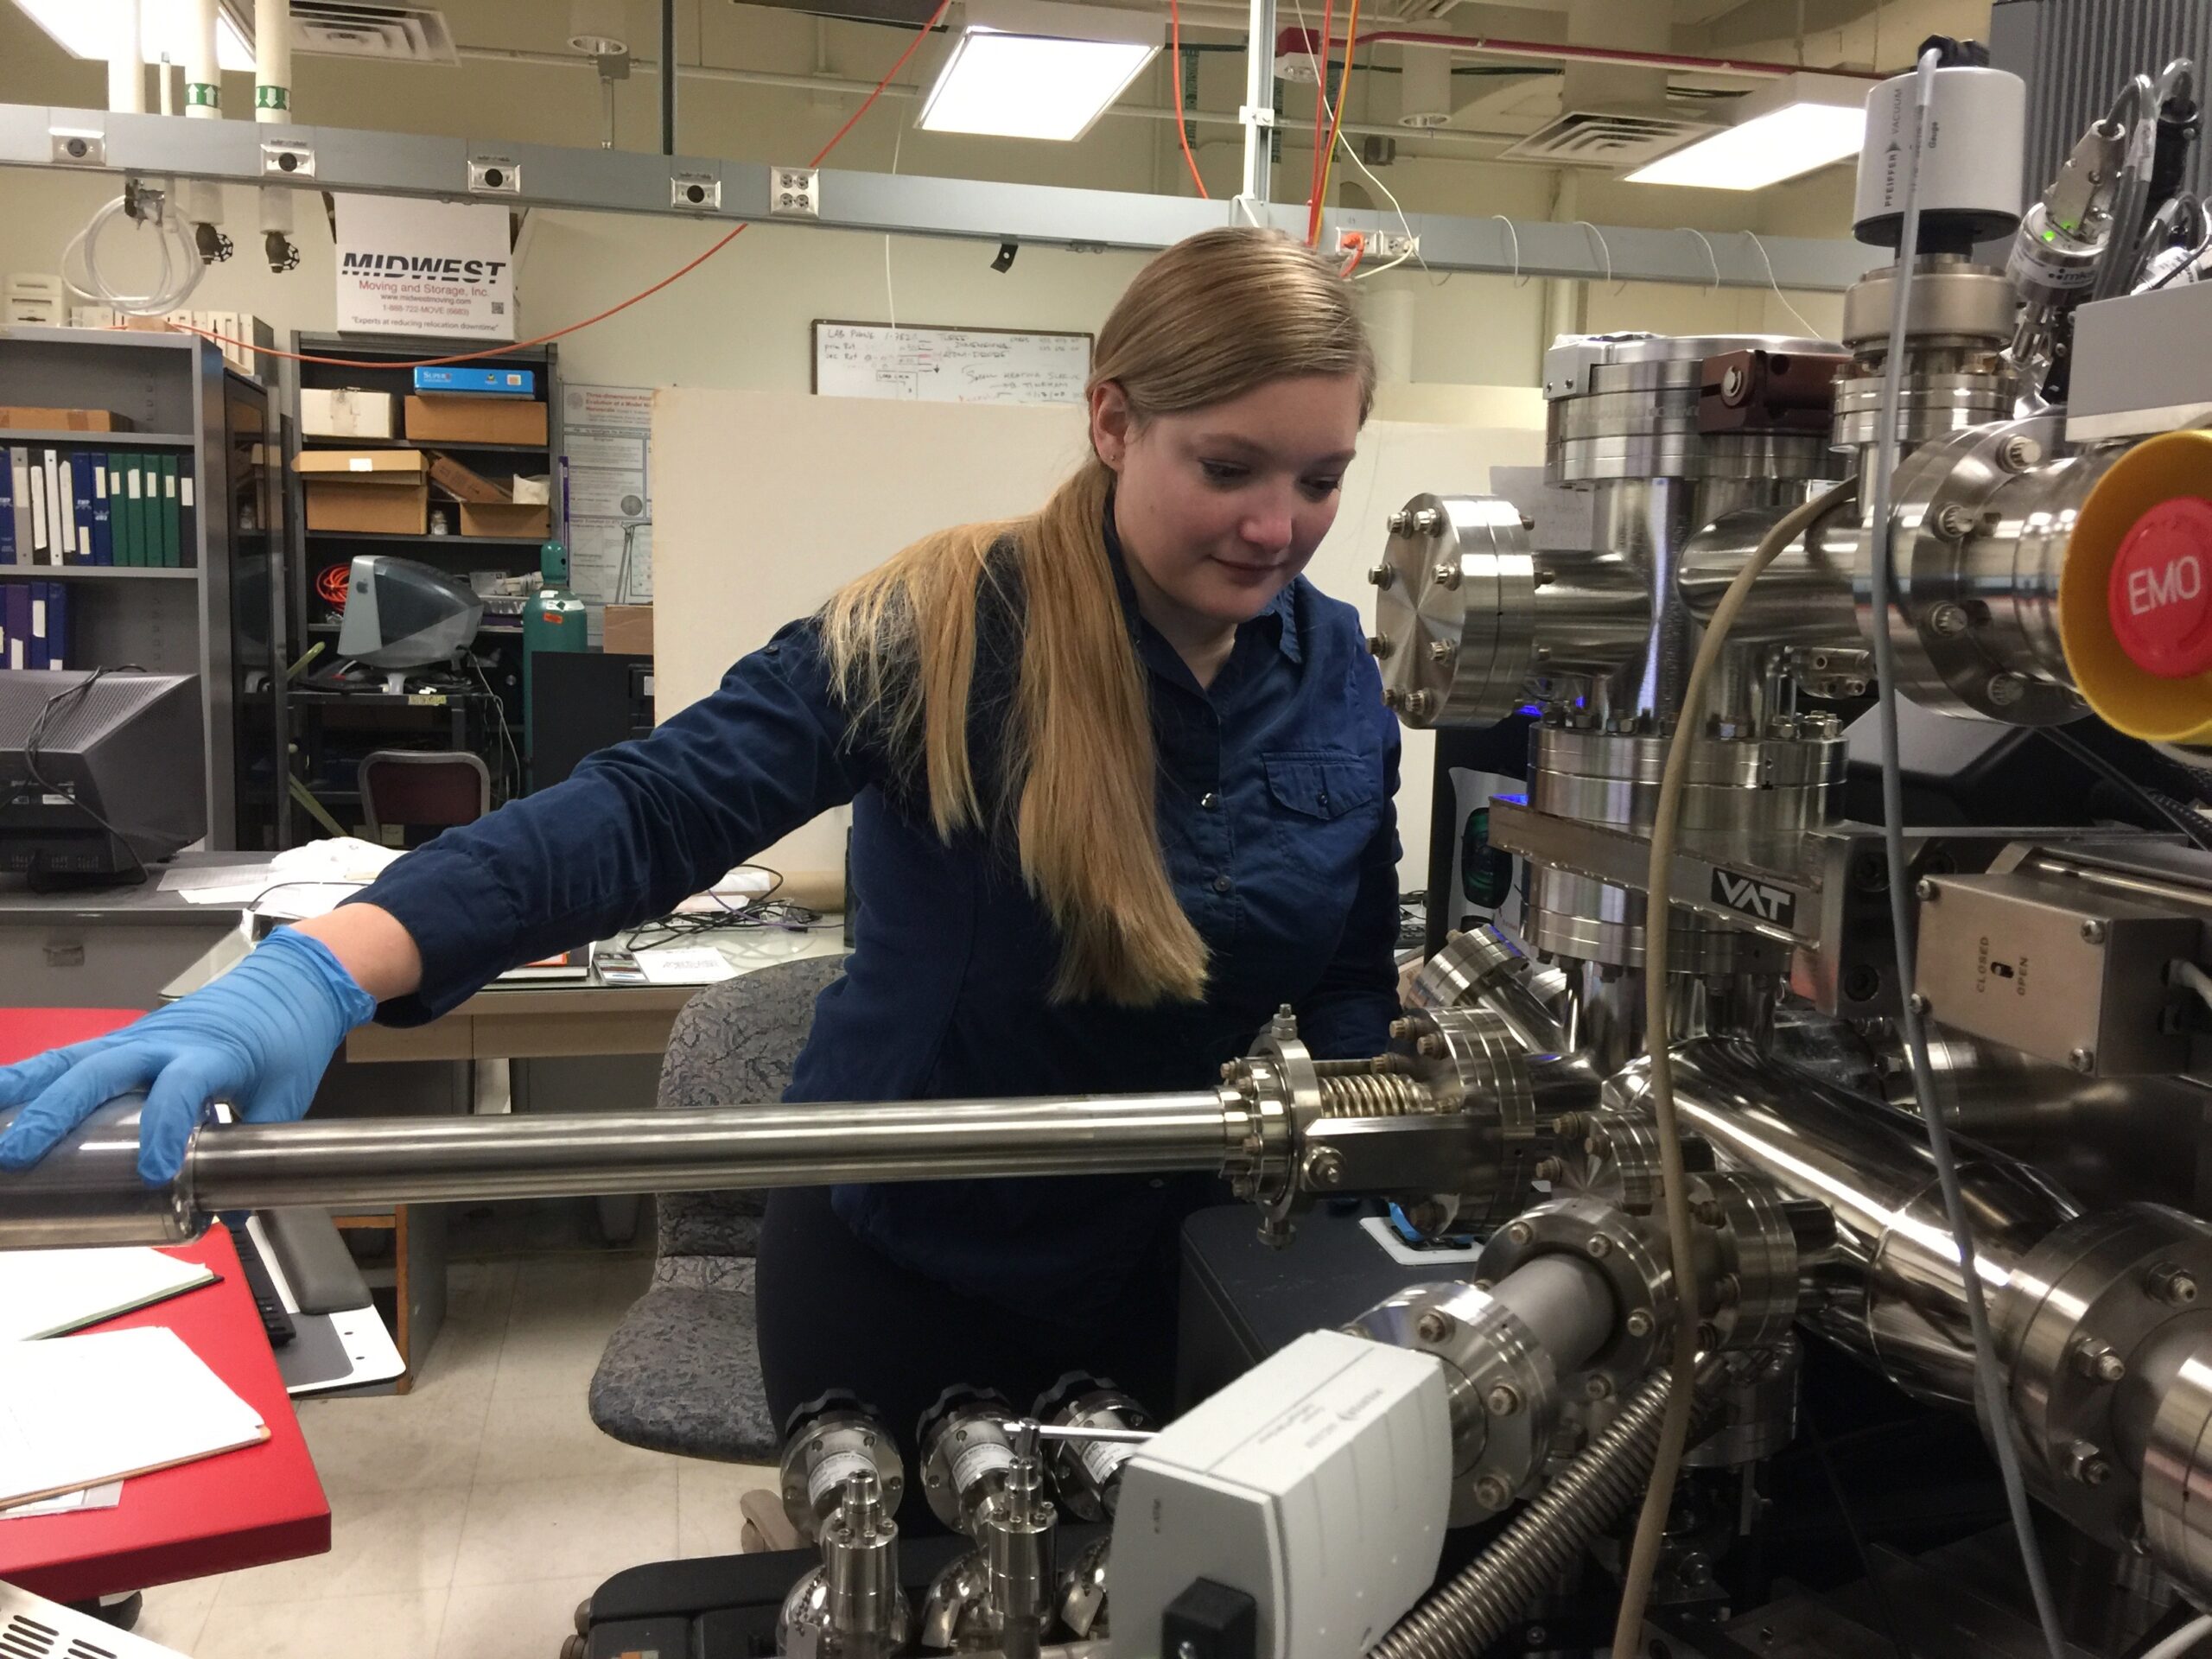 A scientist named Jennika Greer works with an atom probe in a lab. She is holding a long, metal tube and looking towards a special microscope.